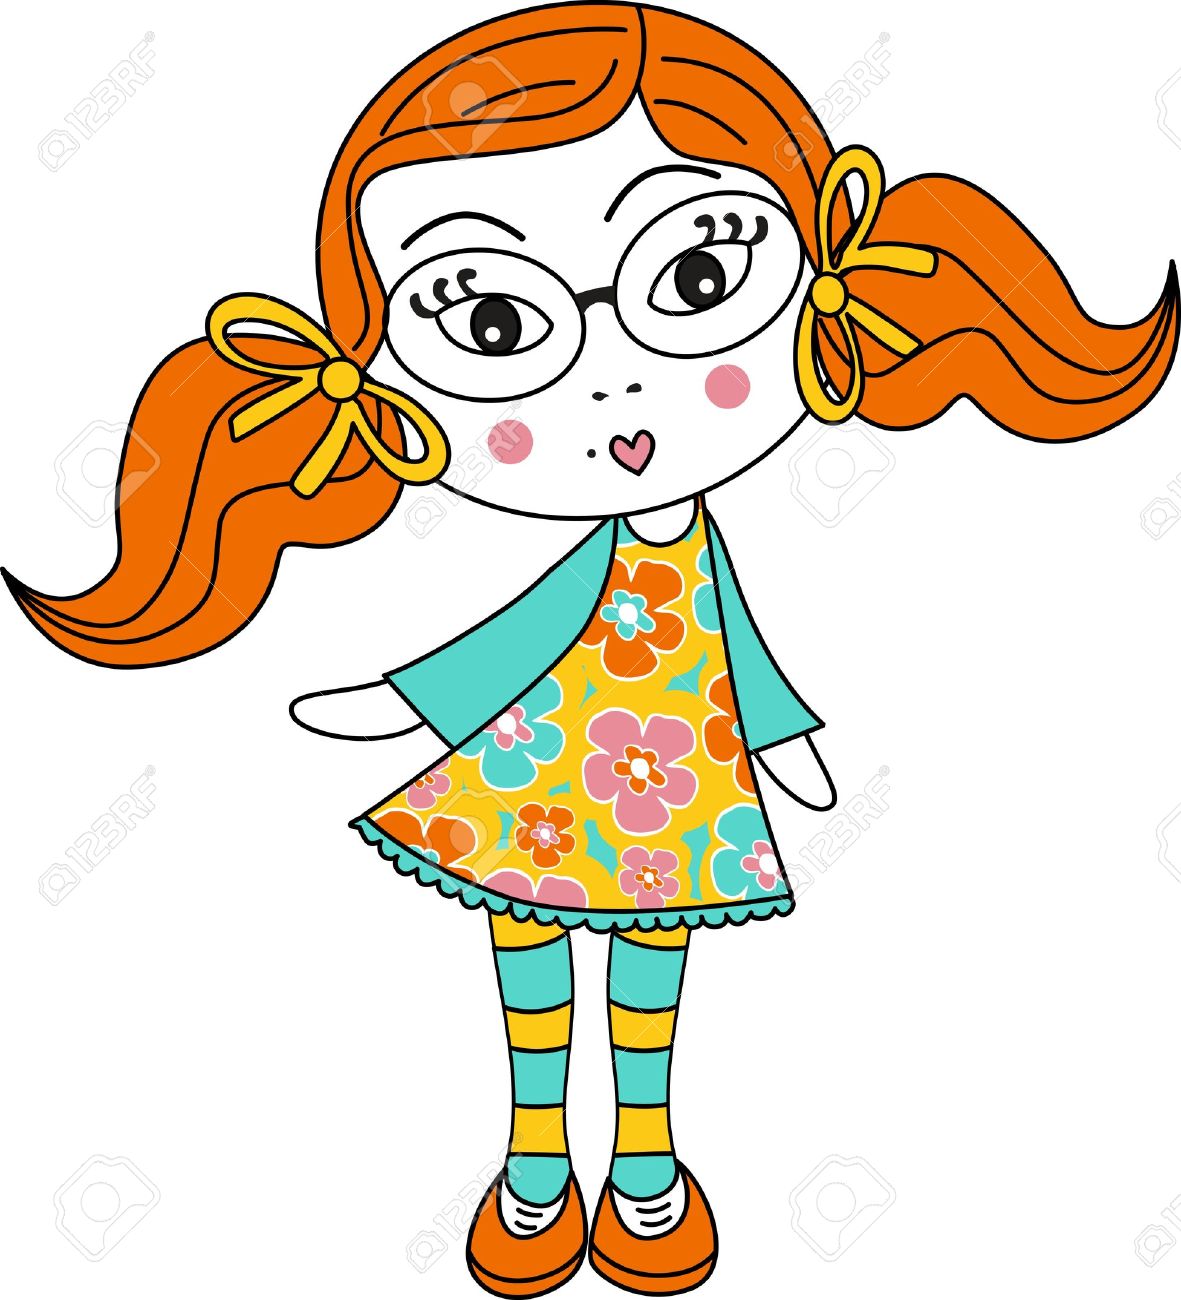 Girl With Striped Socks Royalty Free Cliparts, Vectors, And Stock.